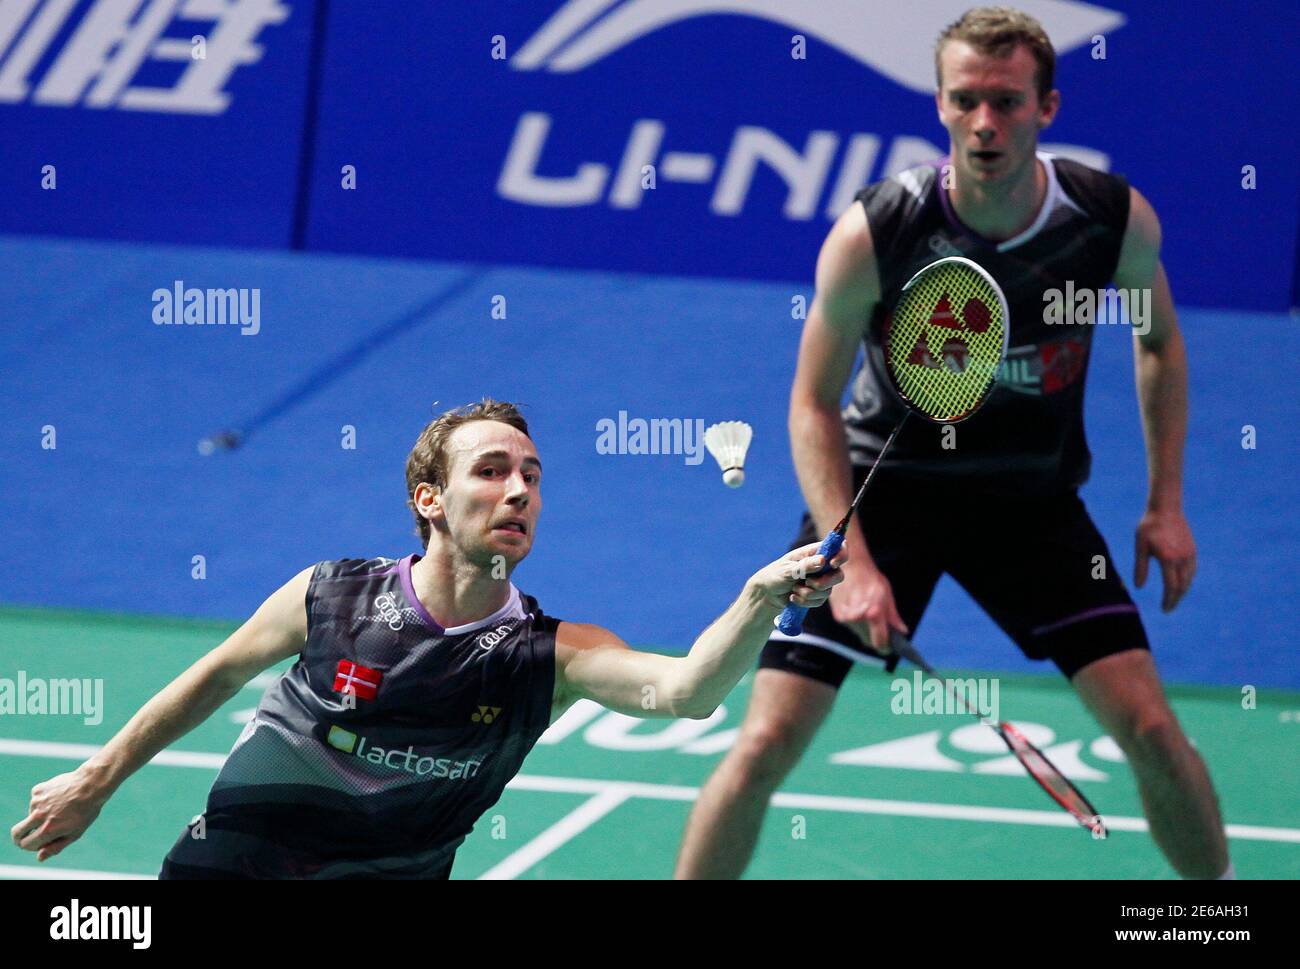 Denmark's Mathias Boe (front) and Carsten Mogensen return a shot to South  Korea's Jung Jae-Sung and Lee Yong-Dae in their men's doubles semifinals  match at the China Open badminton tournament in Shanghai